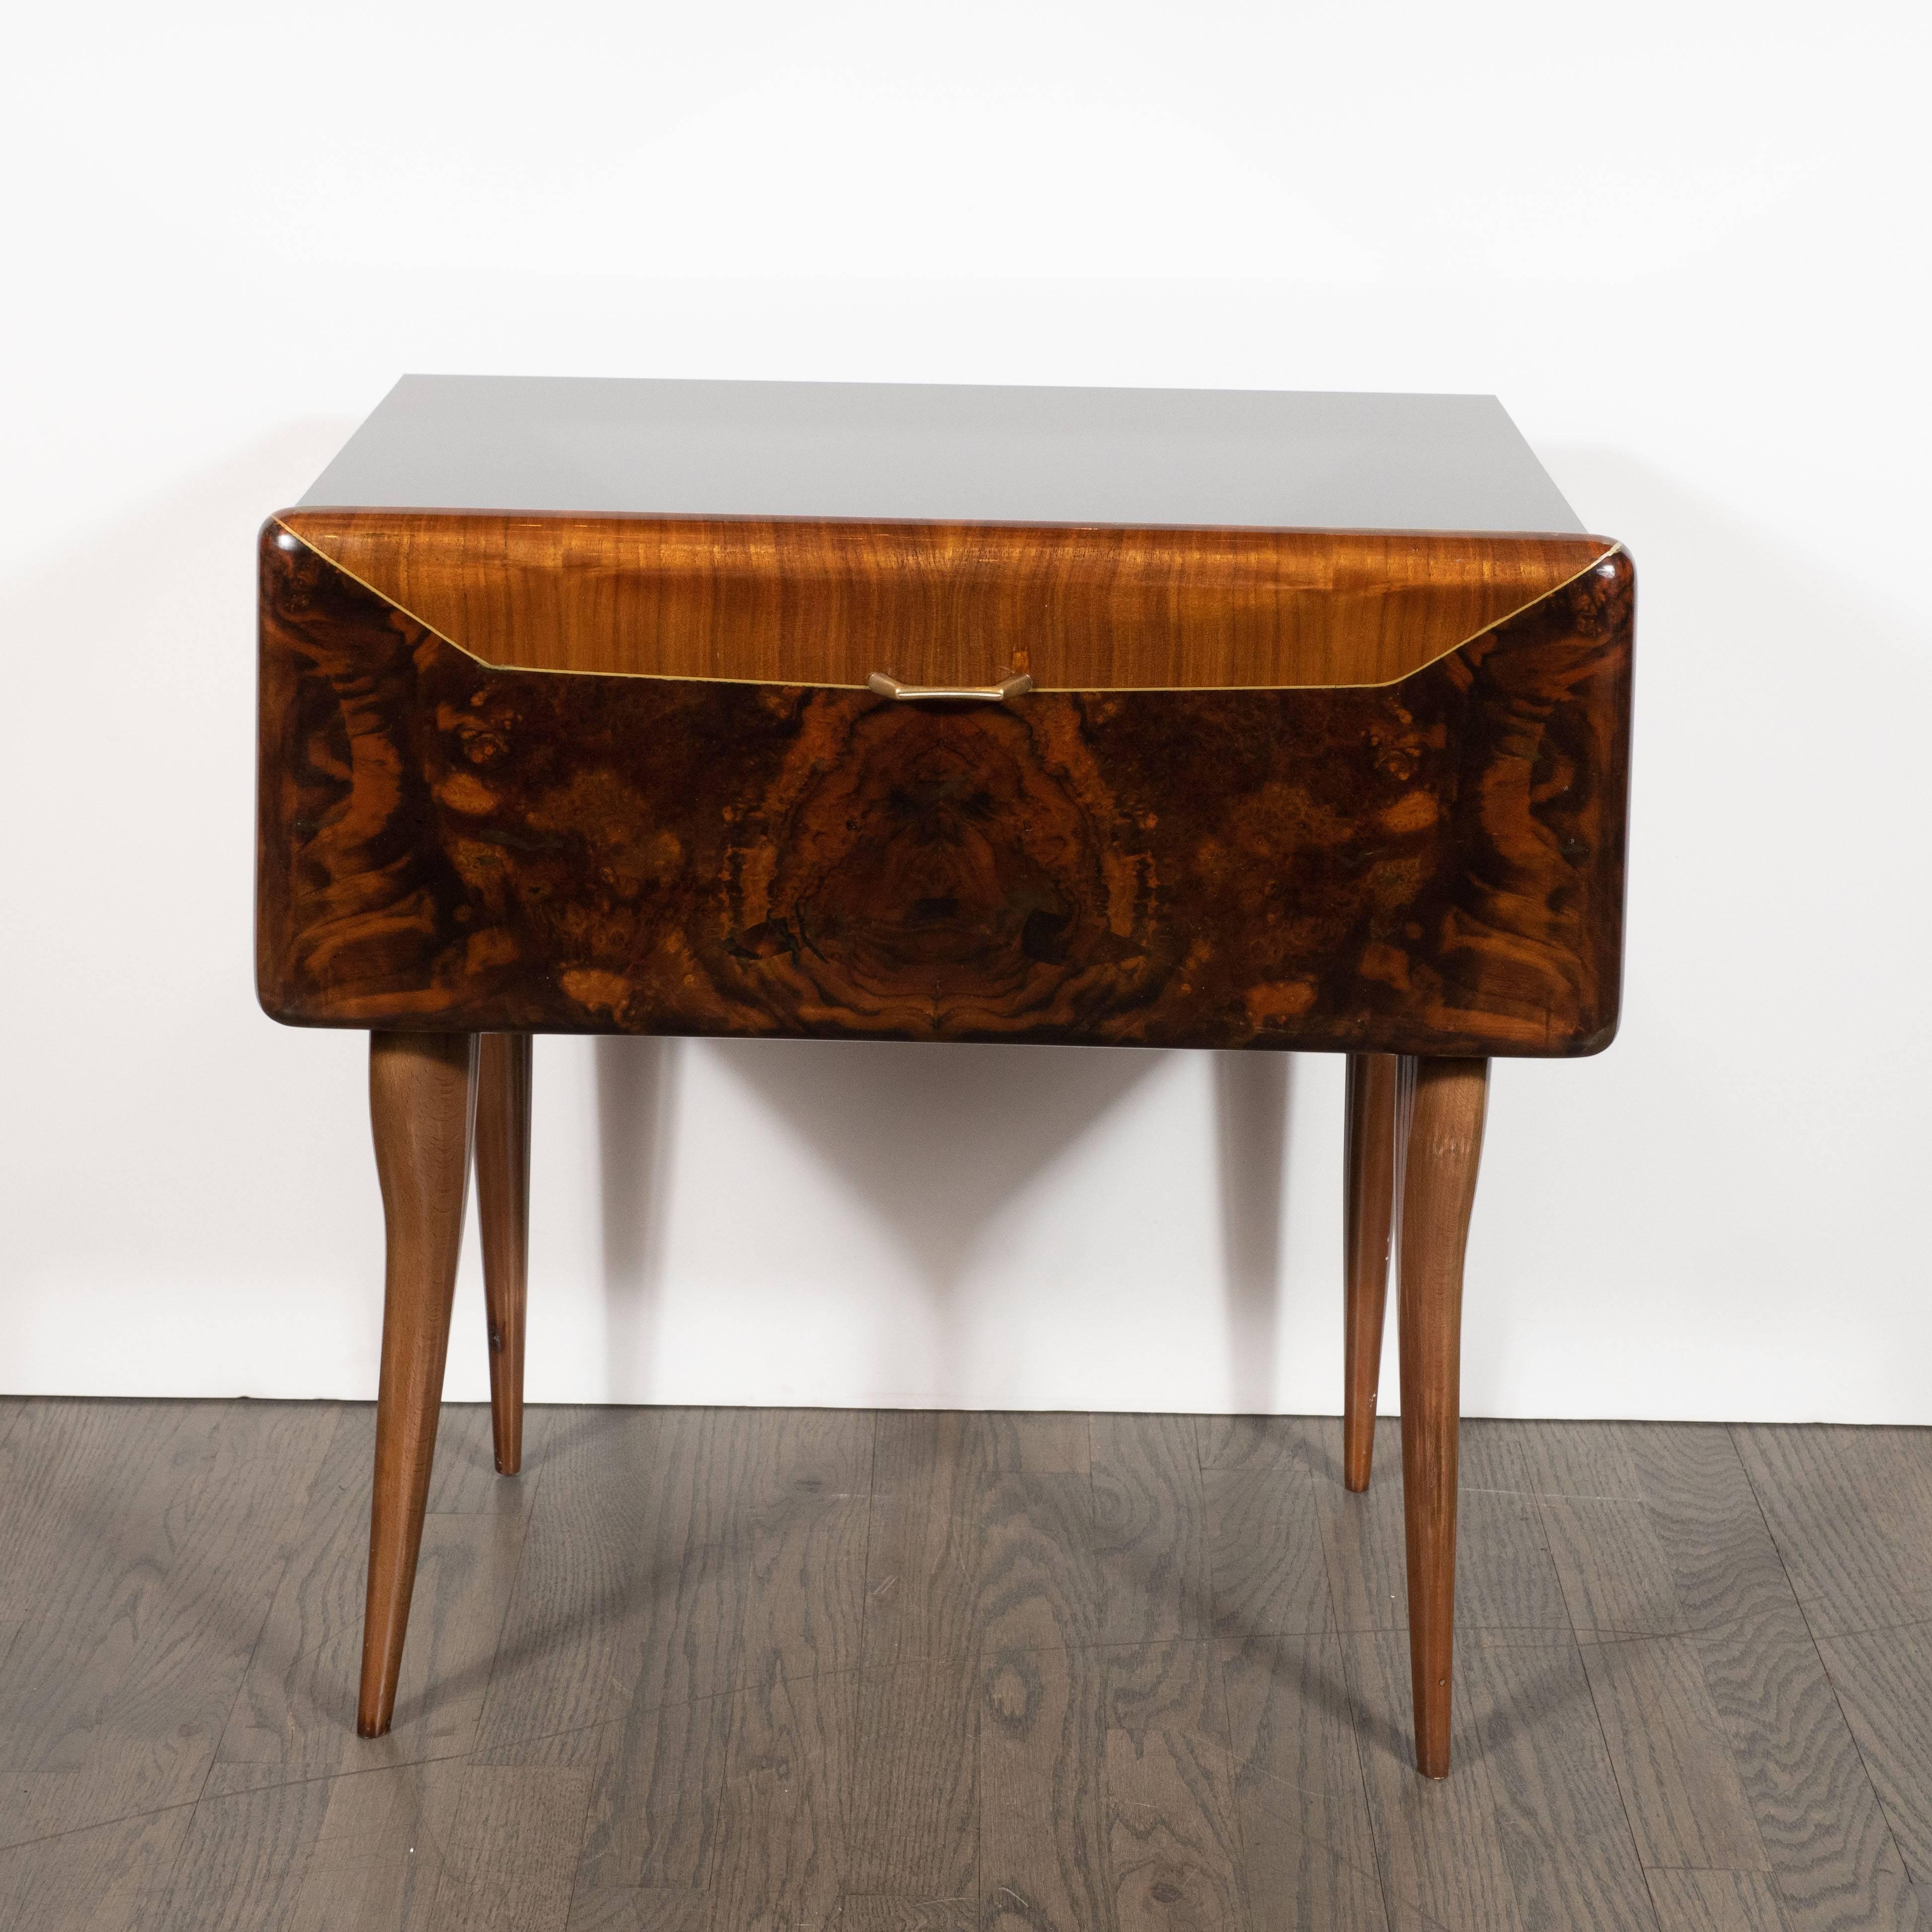 This sophisticated pair of nightstand/ end tables were realized in Italy, circa 1950. They feature black vitrolite tops; a drop front drawer with bookmatched inlays of burled walnut and zebra wood with a holly inlay. Additionally, each piece offers